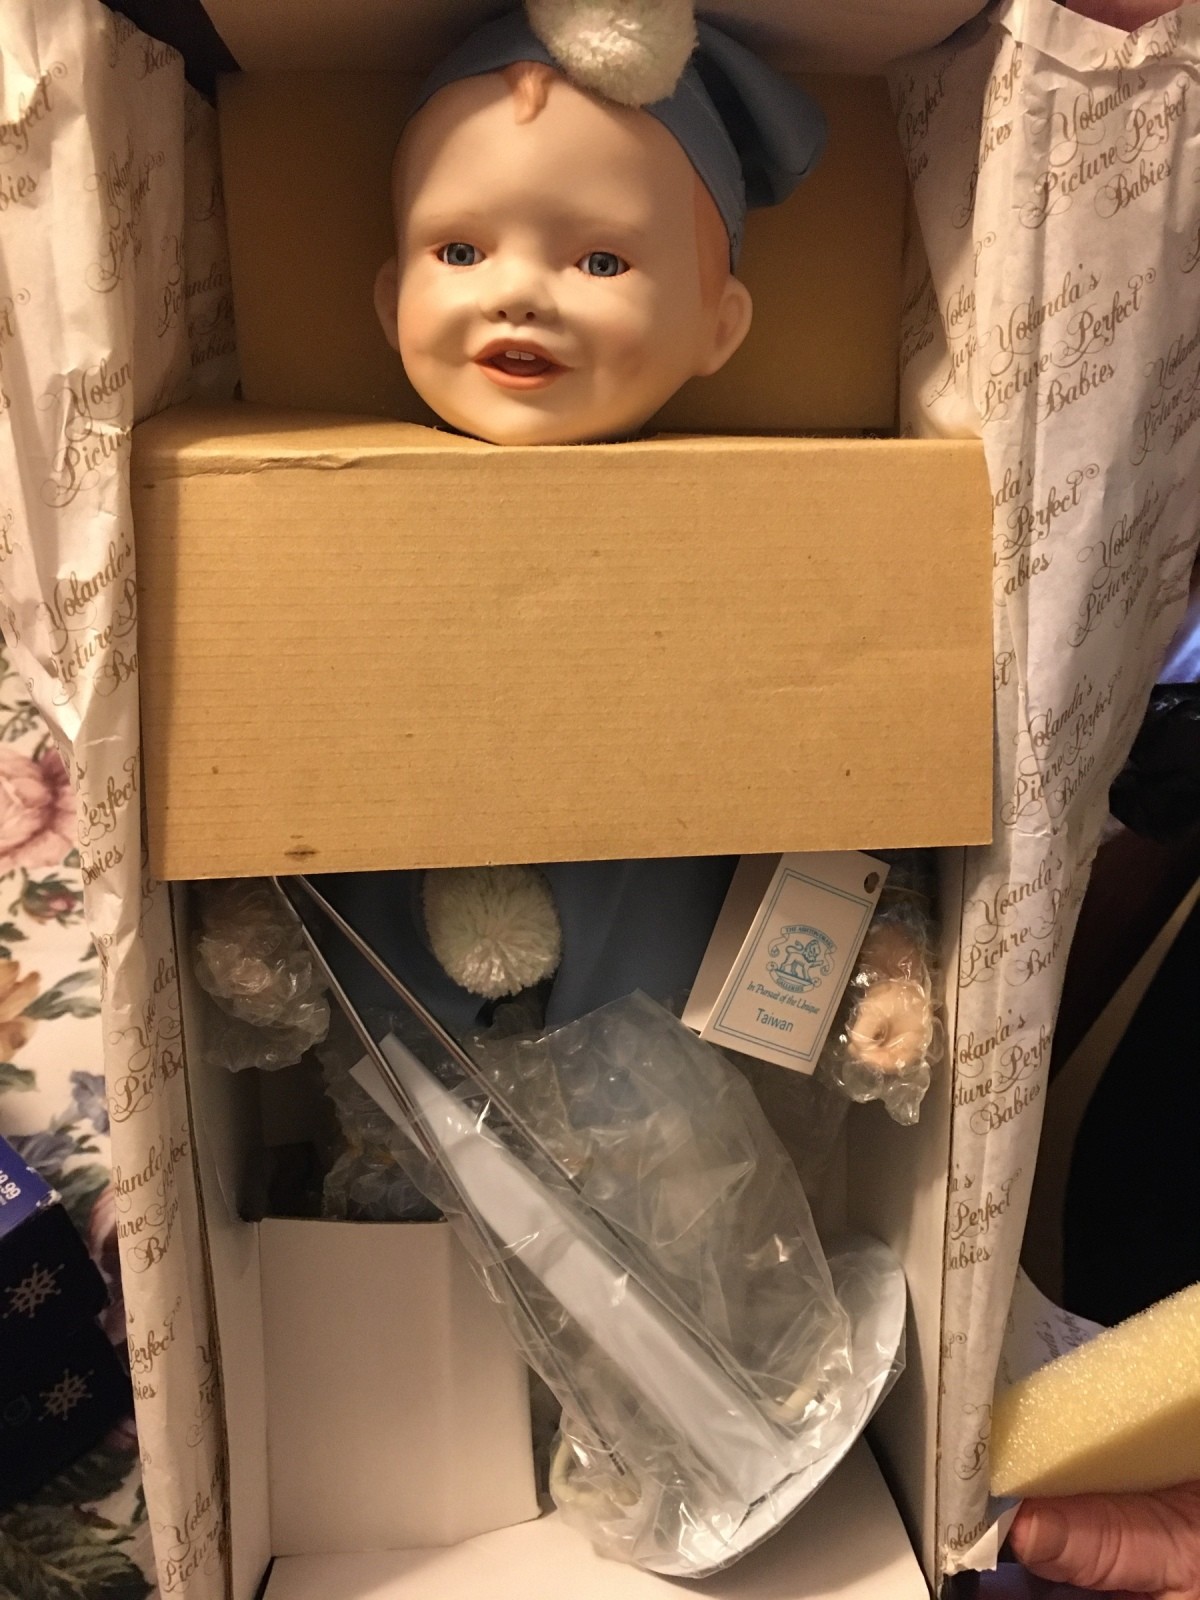 where can i sell antique dolls near me